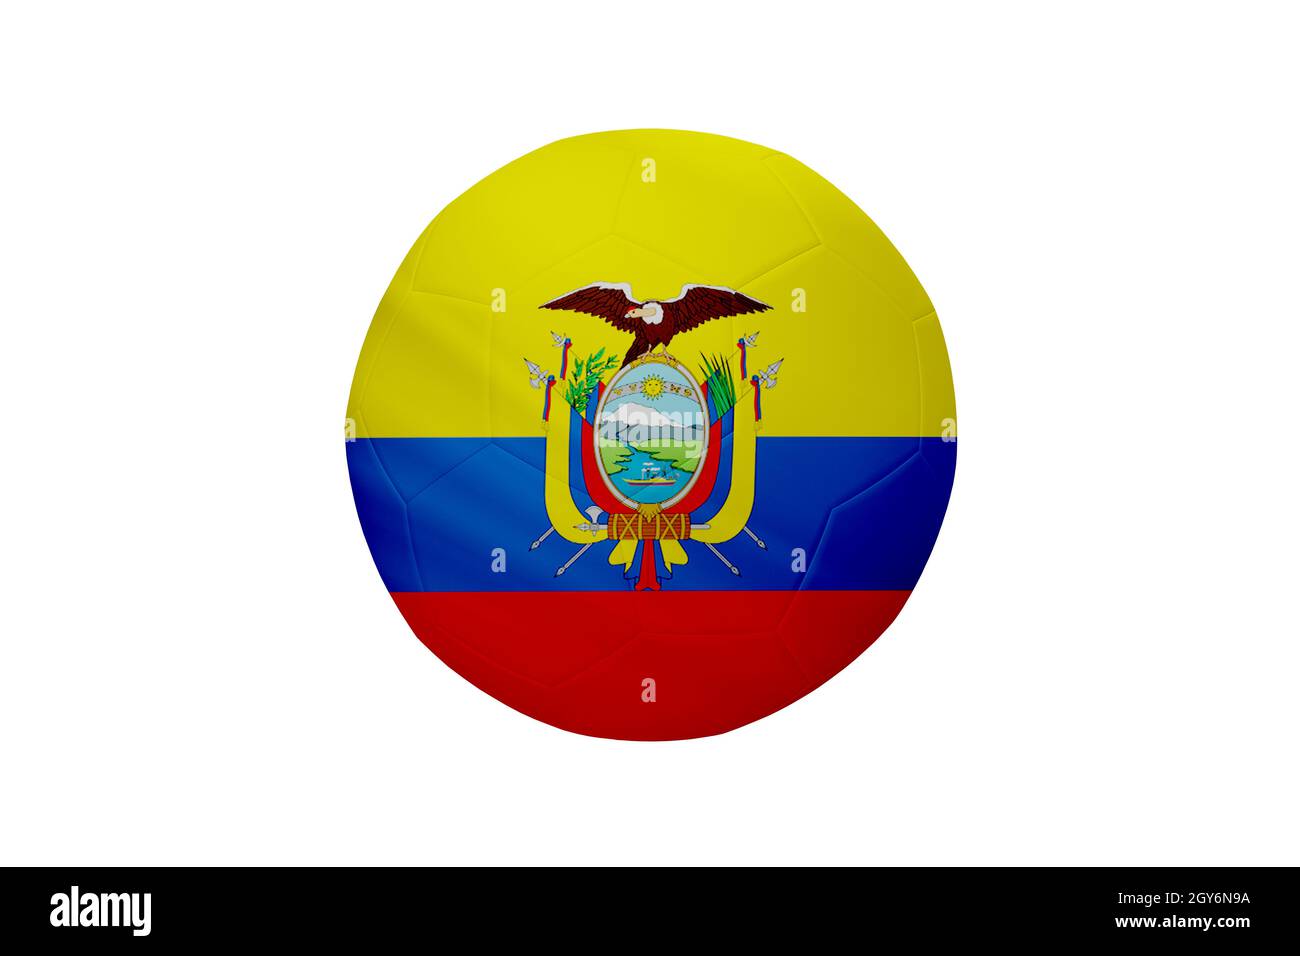 Football in the colors of the Ecuador flag isolated on white background. In a conceptual championship image supporting Ecuador. Stock Photo